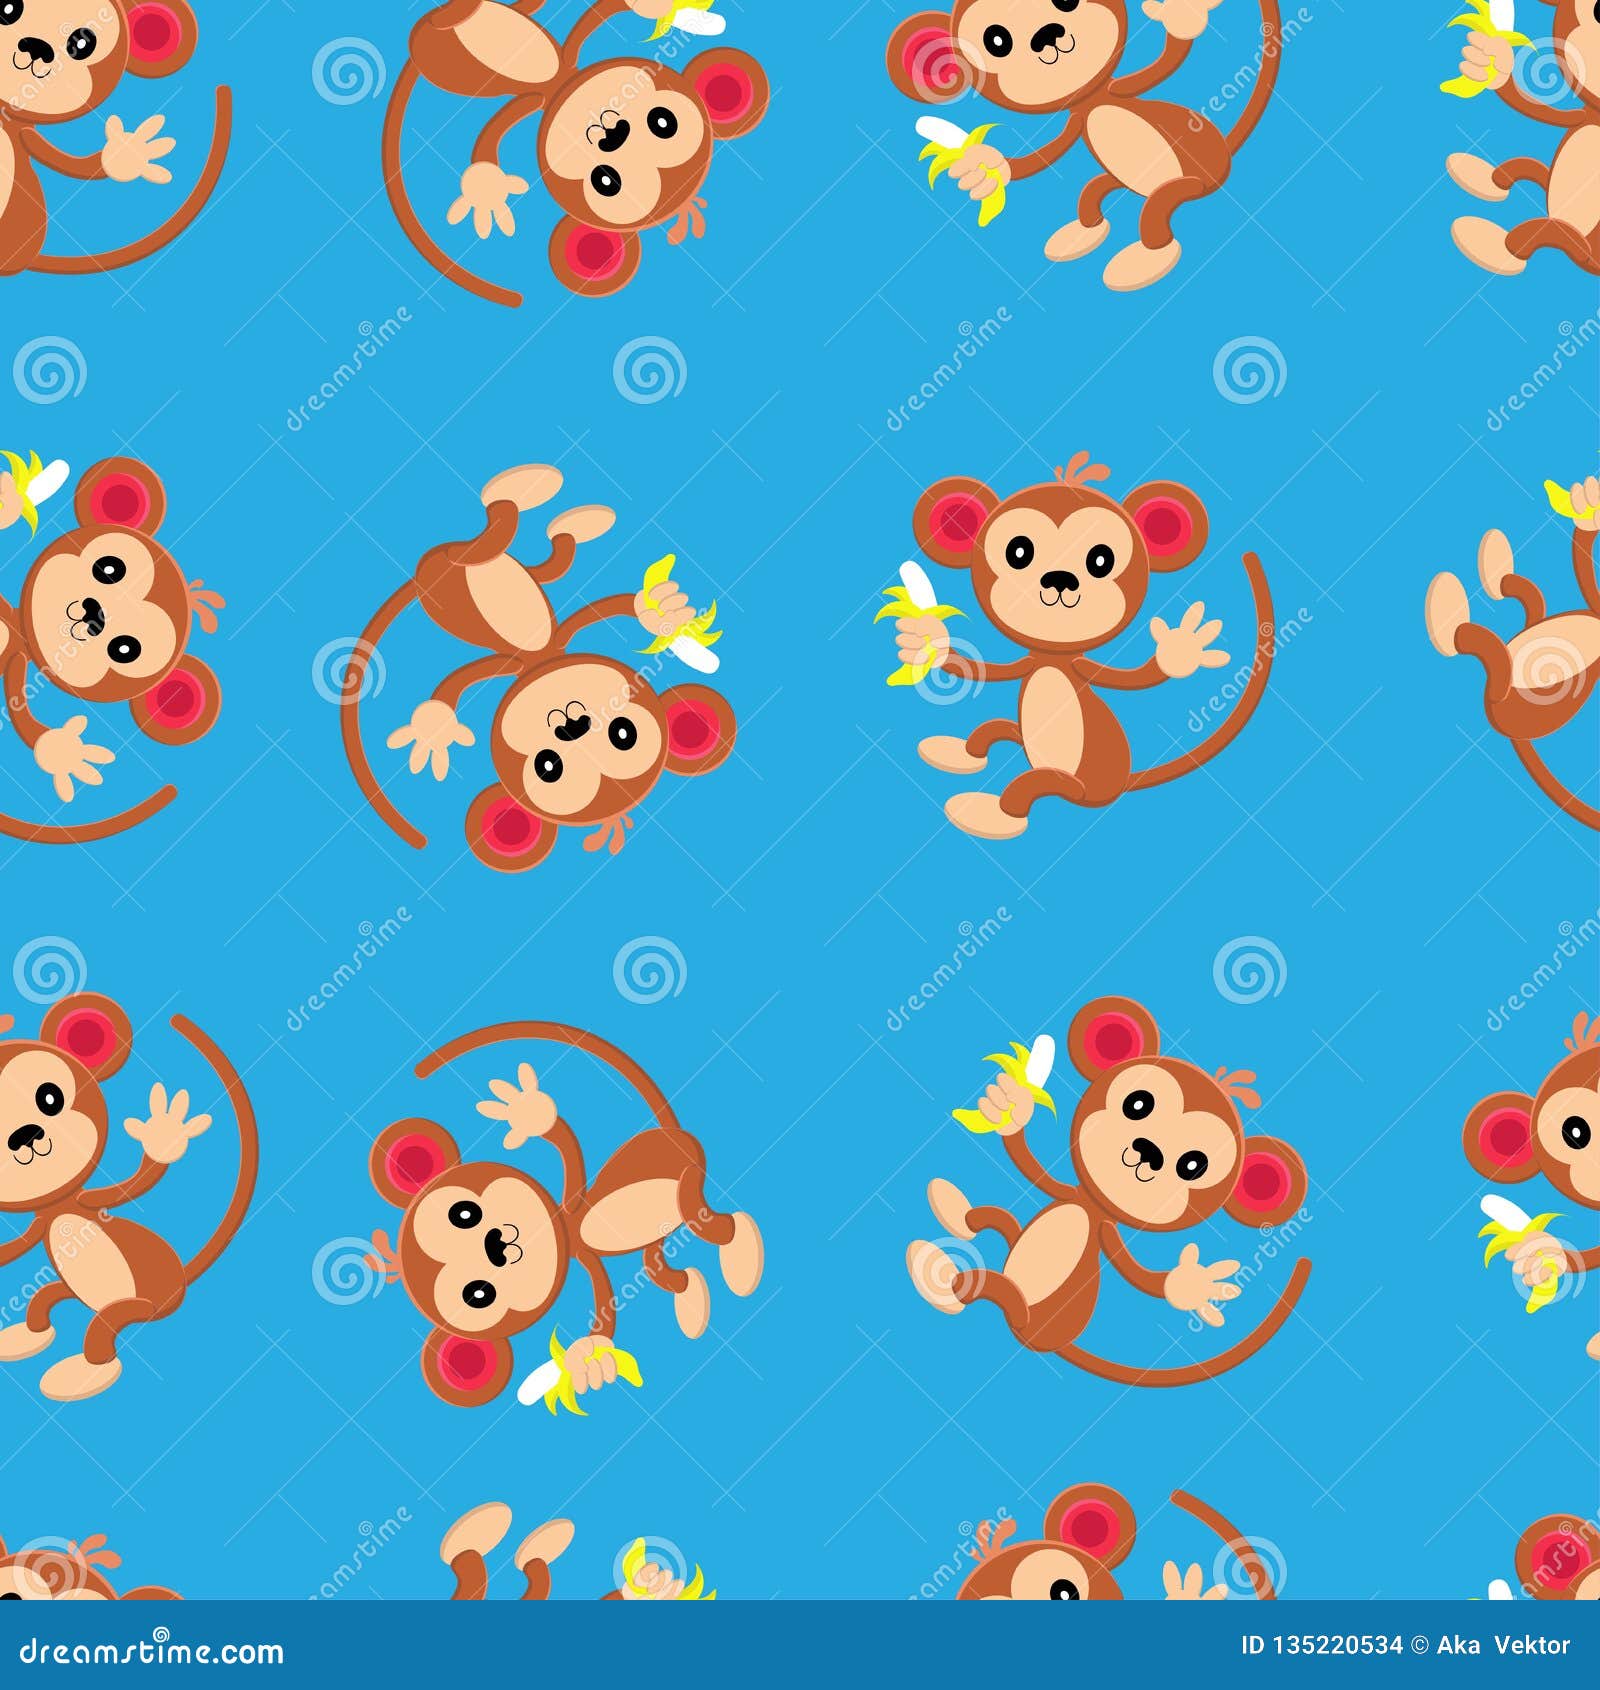 Seamless Pattern with Cute Monkey and Funny Cartoon Zoo Animals on Blue  Background Stock Vector - Illustration of card, decorative: 135220534